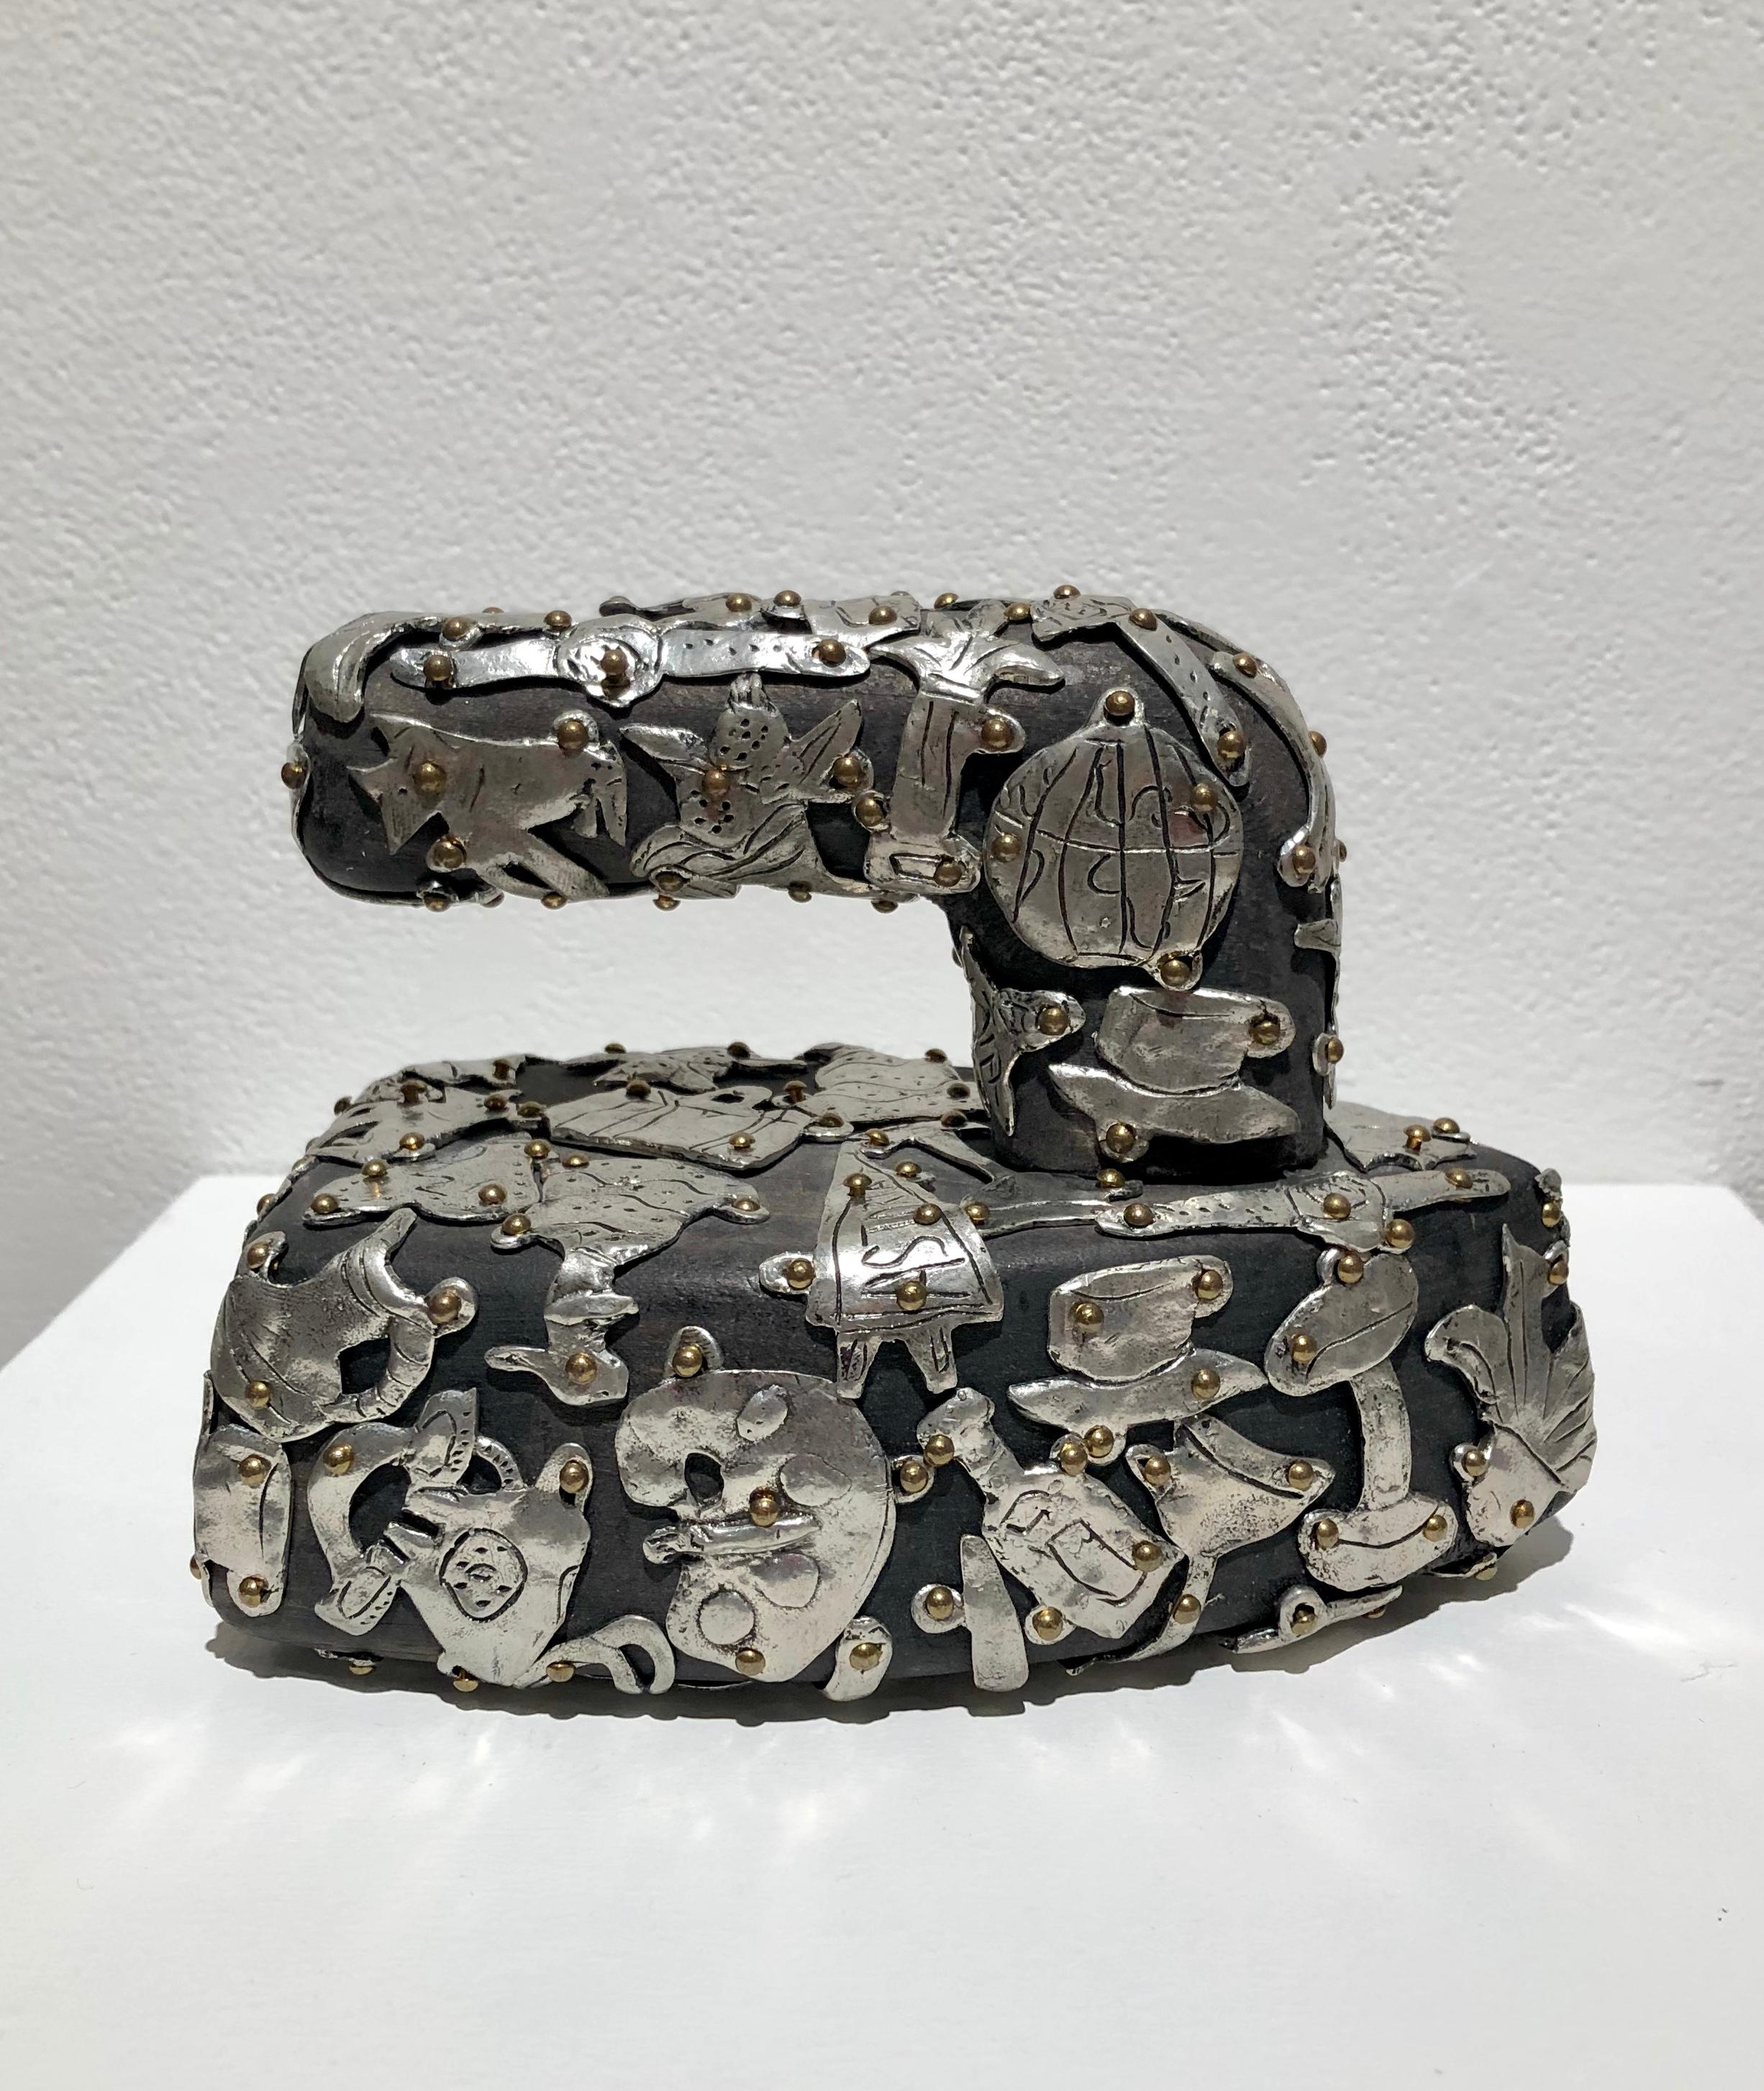  Iron, small scale sculpture in pewter and wood, with Female Fetishes - Art by Claudia DeMonte